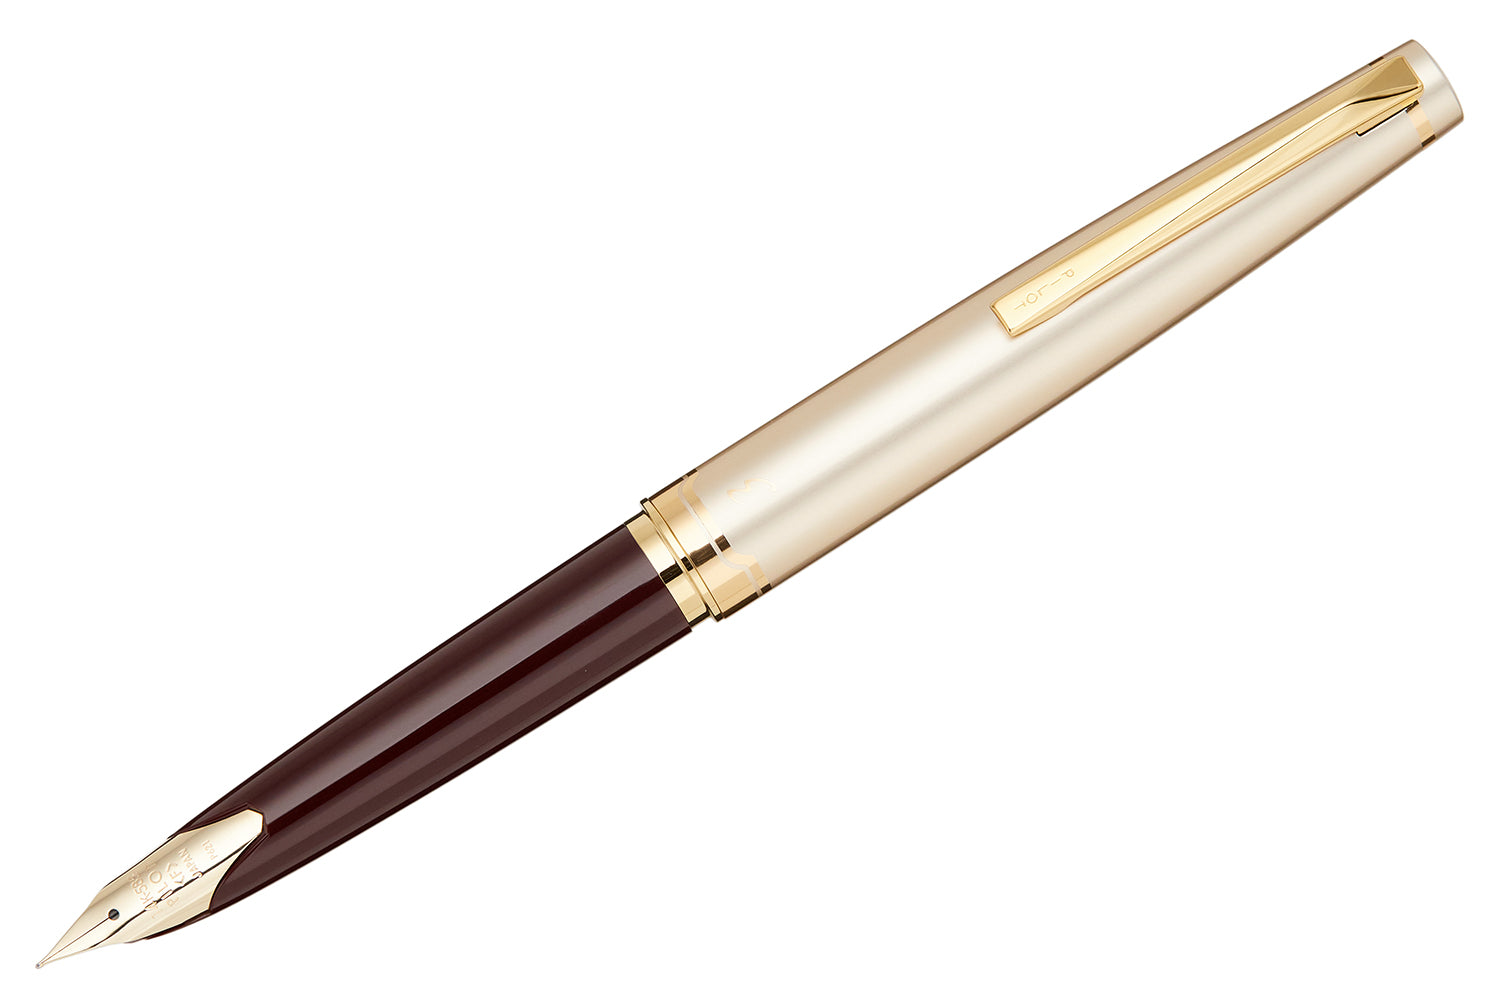 Vintage-Inspired Modern Fountain Pens - The Goulet Pen Company